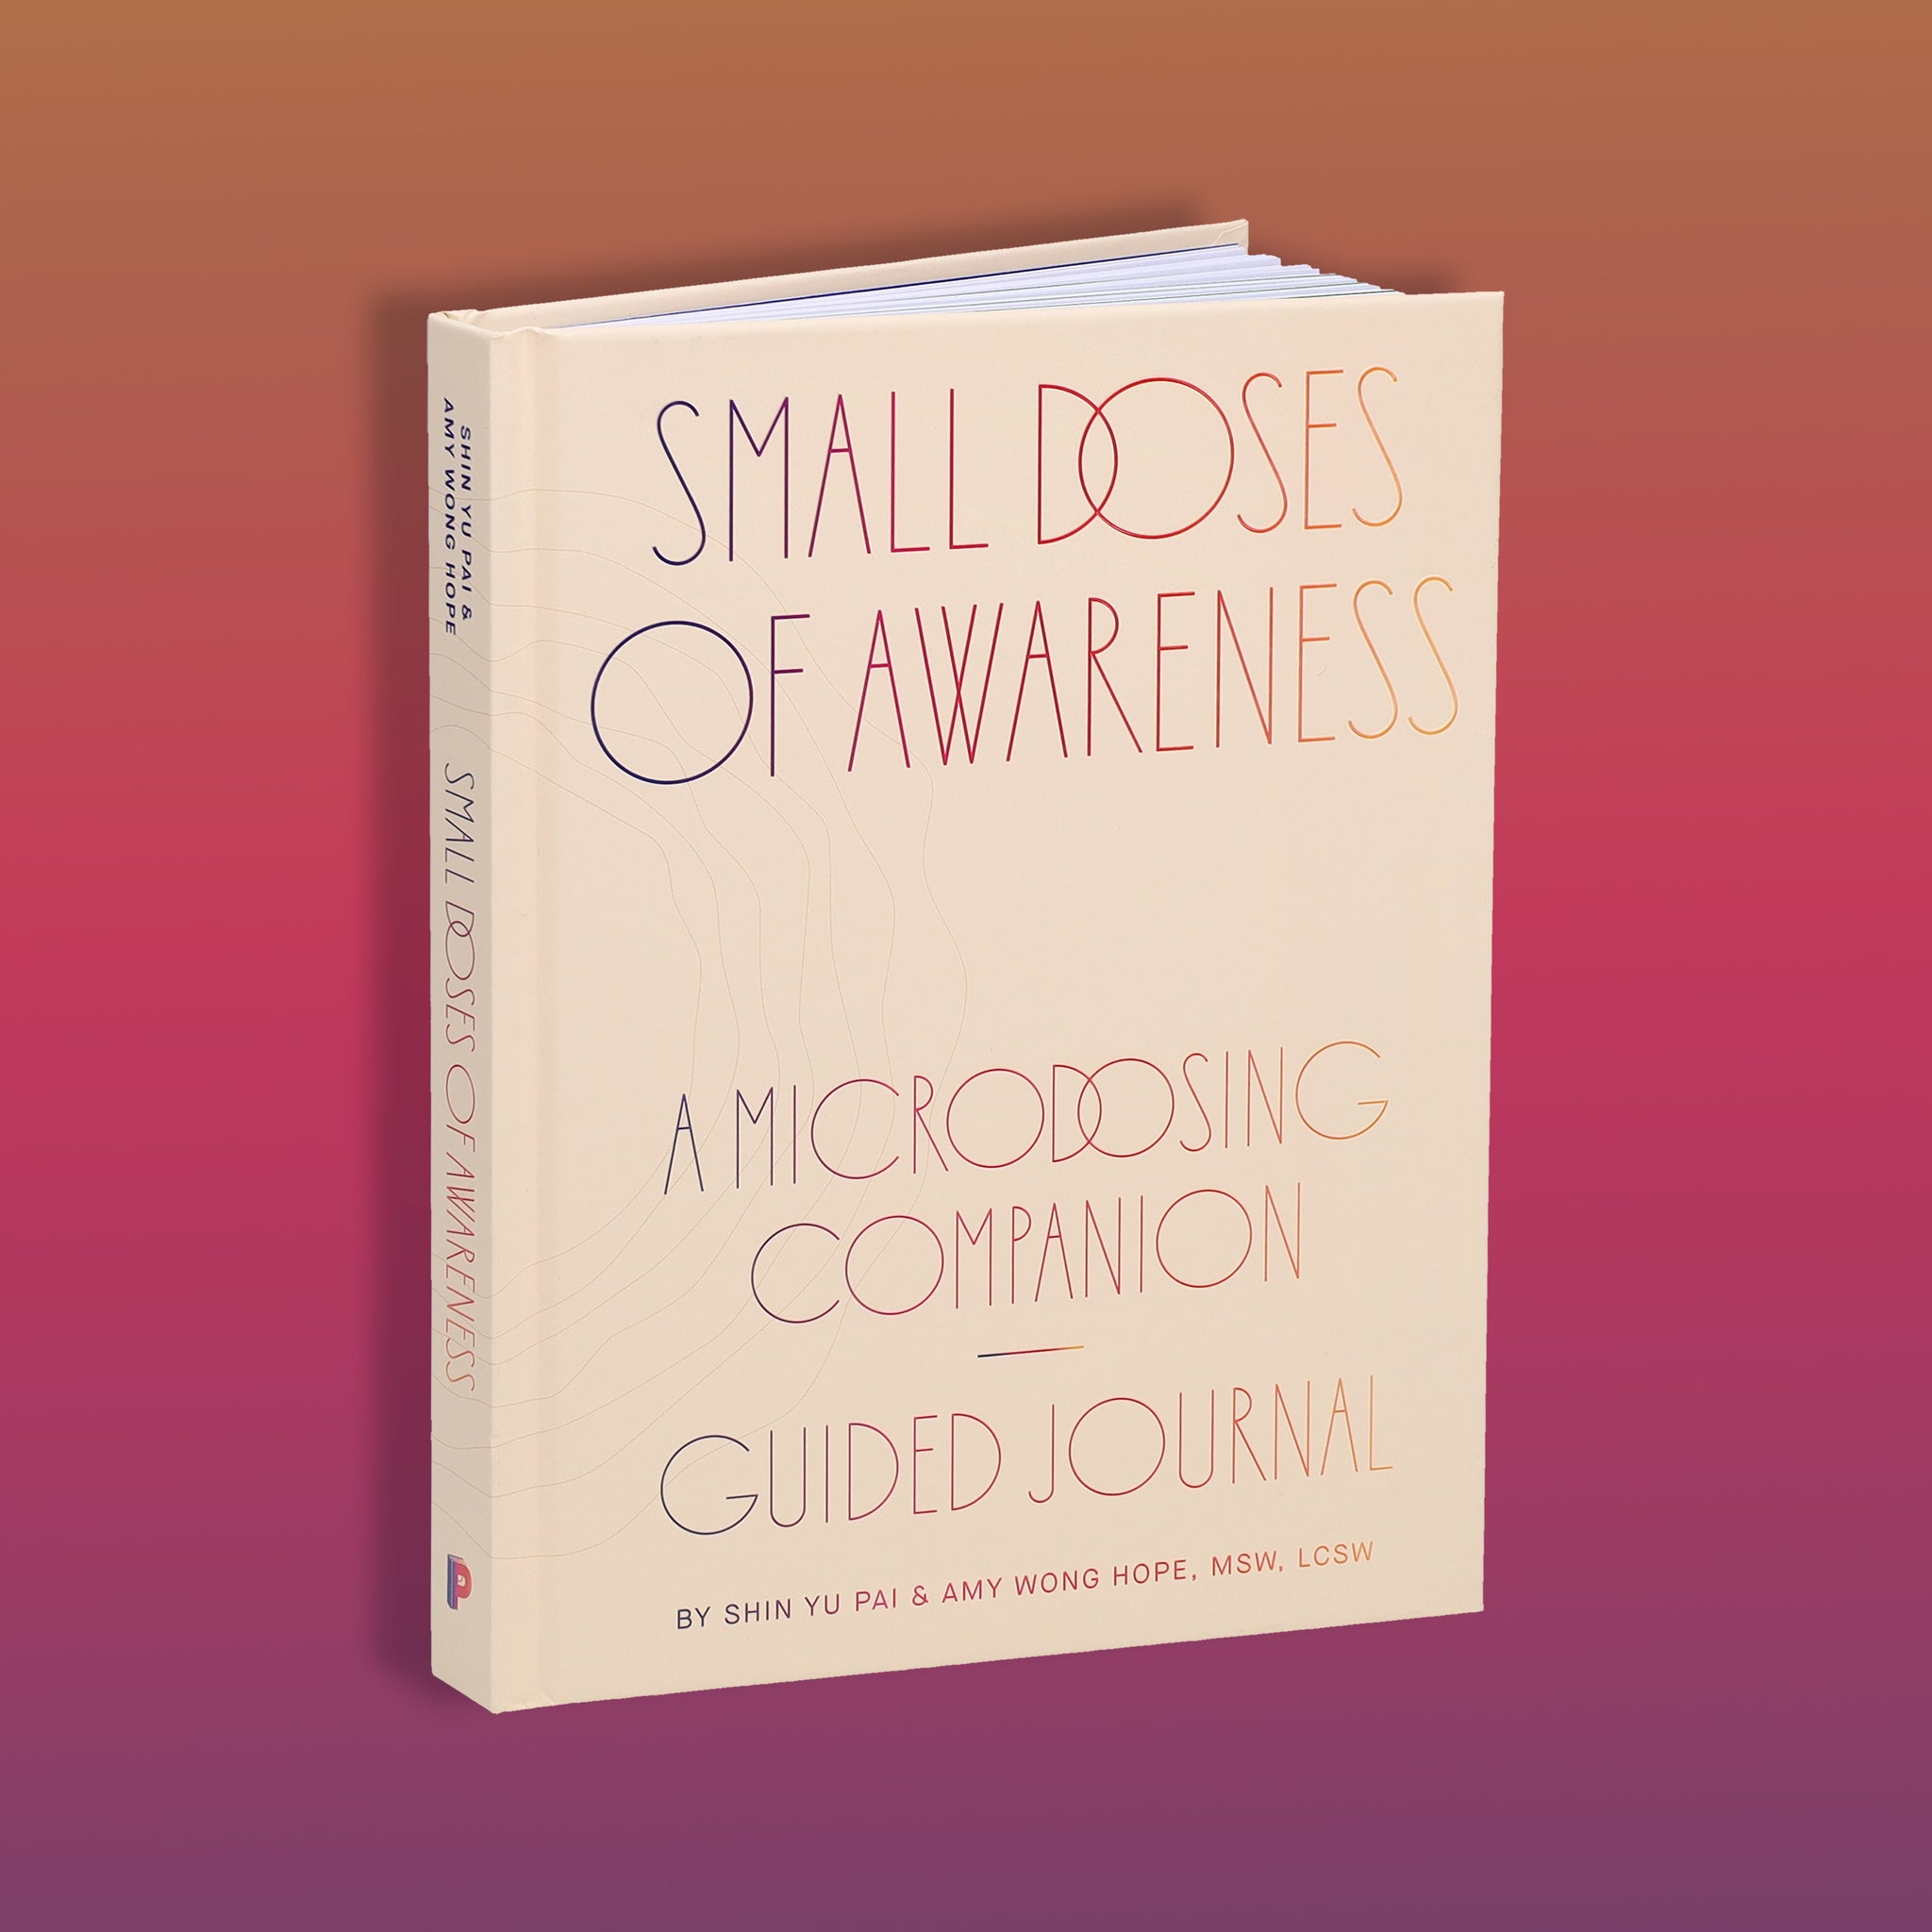 Small Doses of Awareness